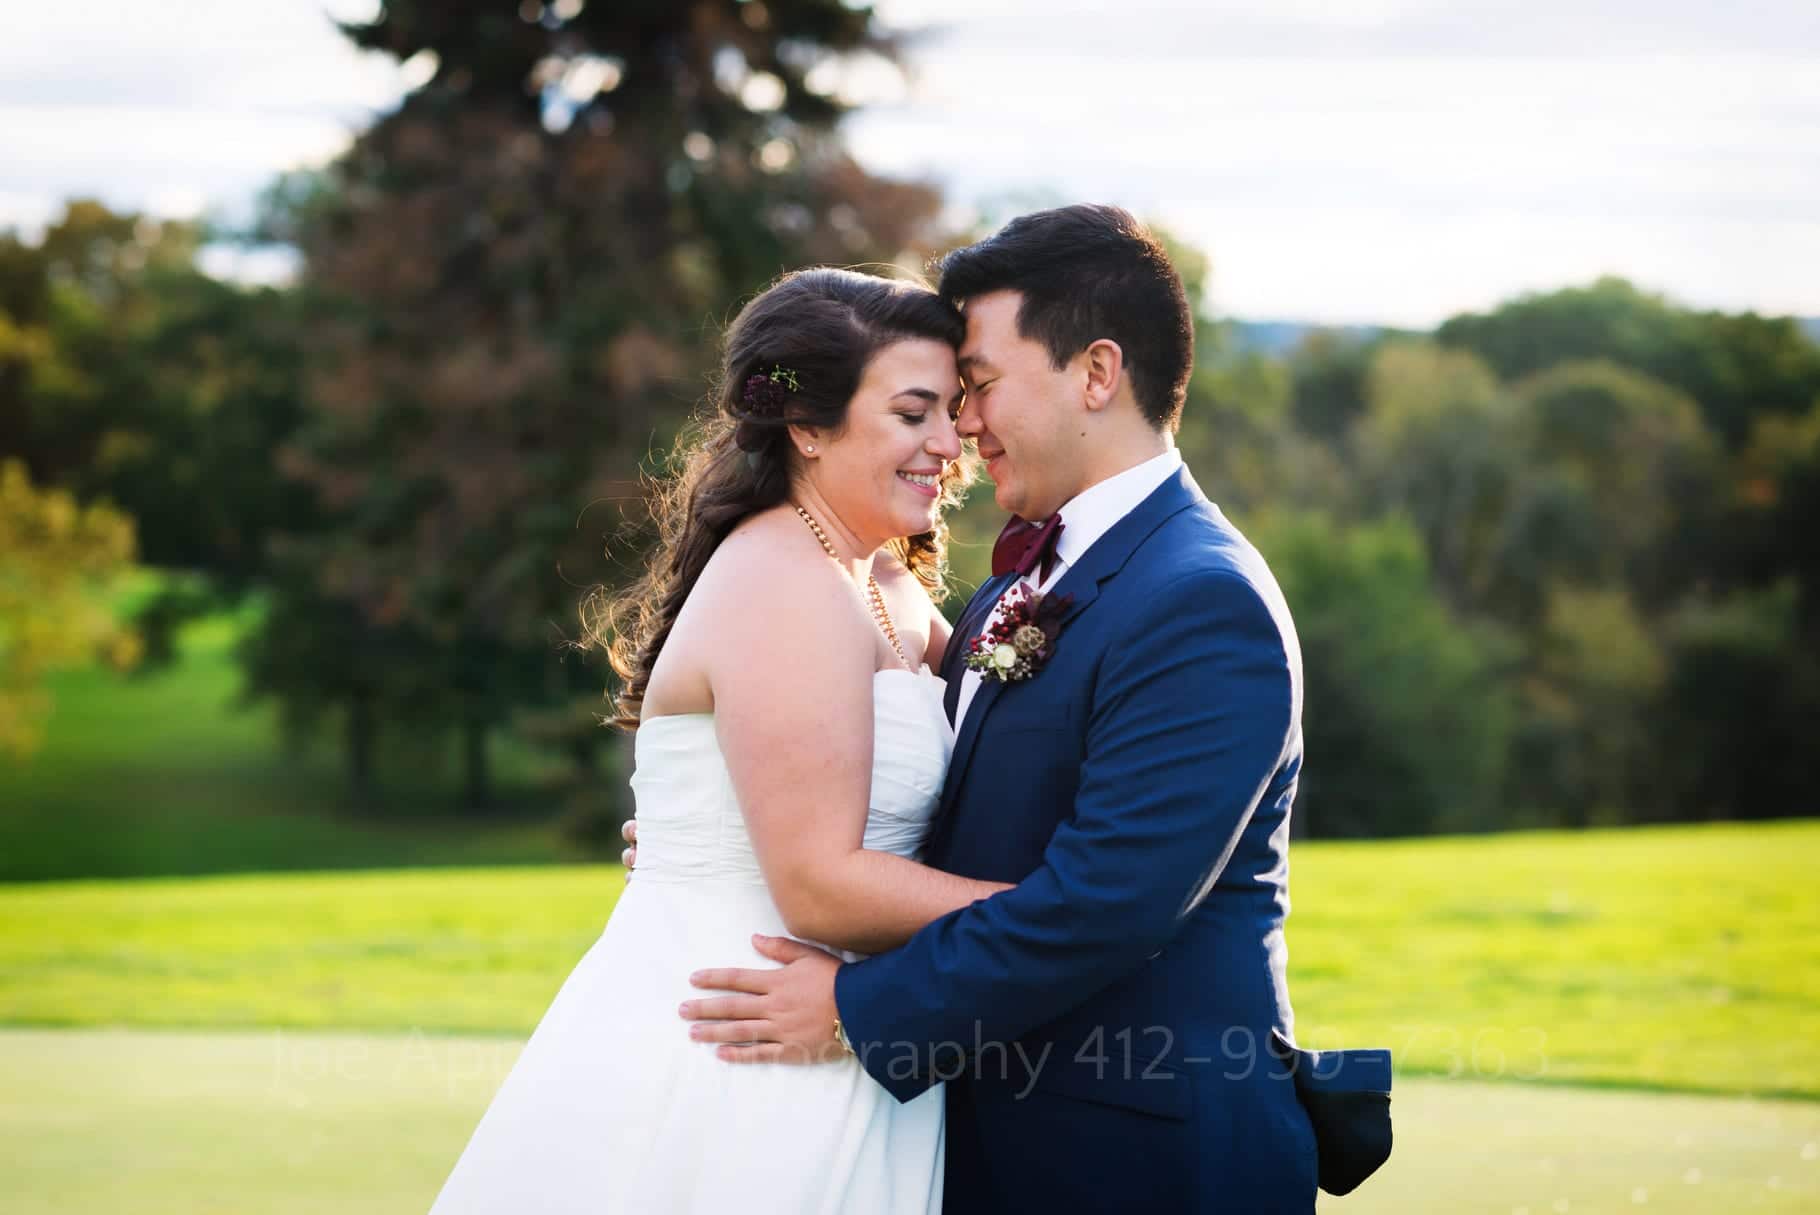 A bride and groom touch foreheads as they embrace while standing on a golf course.